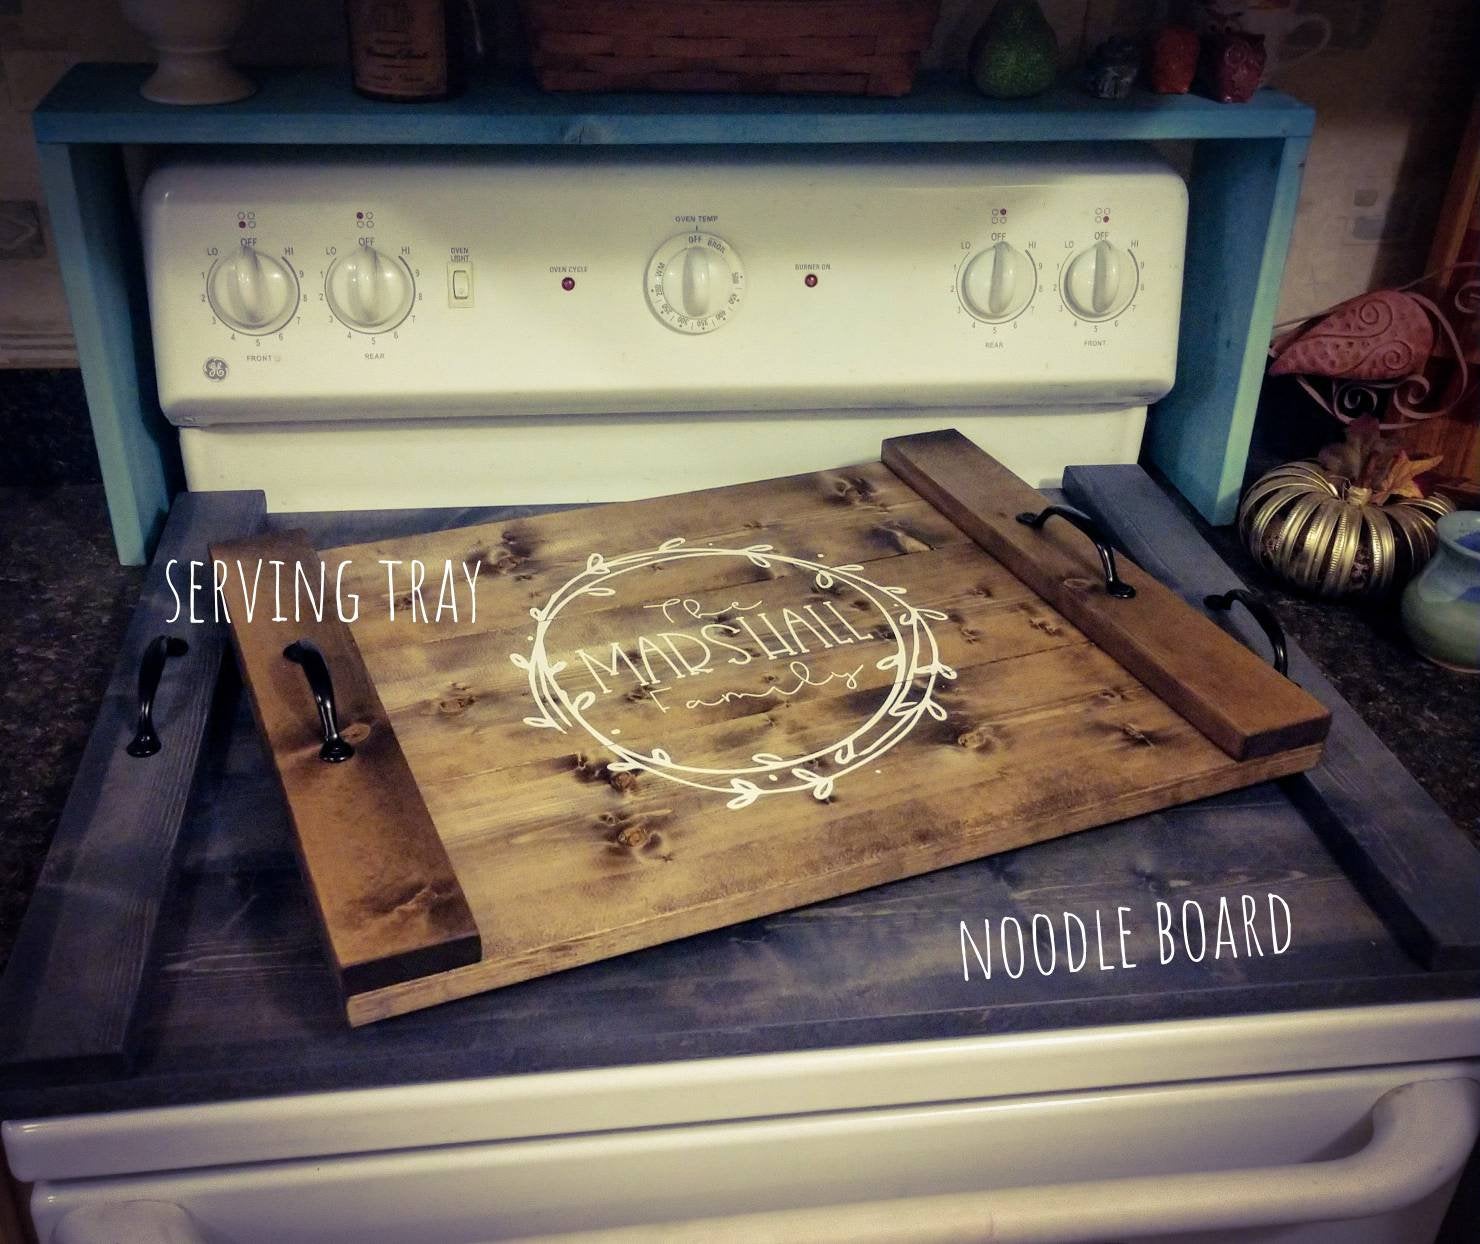 Farmhouse Stove Top Oven Cover Noodle Board, Stove Cover, Serving Tray,  Sink Cover - Heifer Please Cow Farmhouse Decor